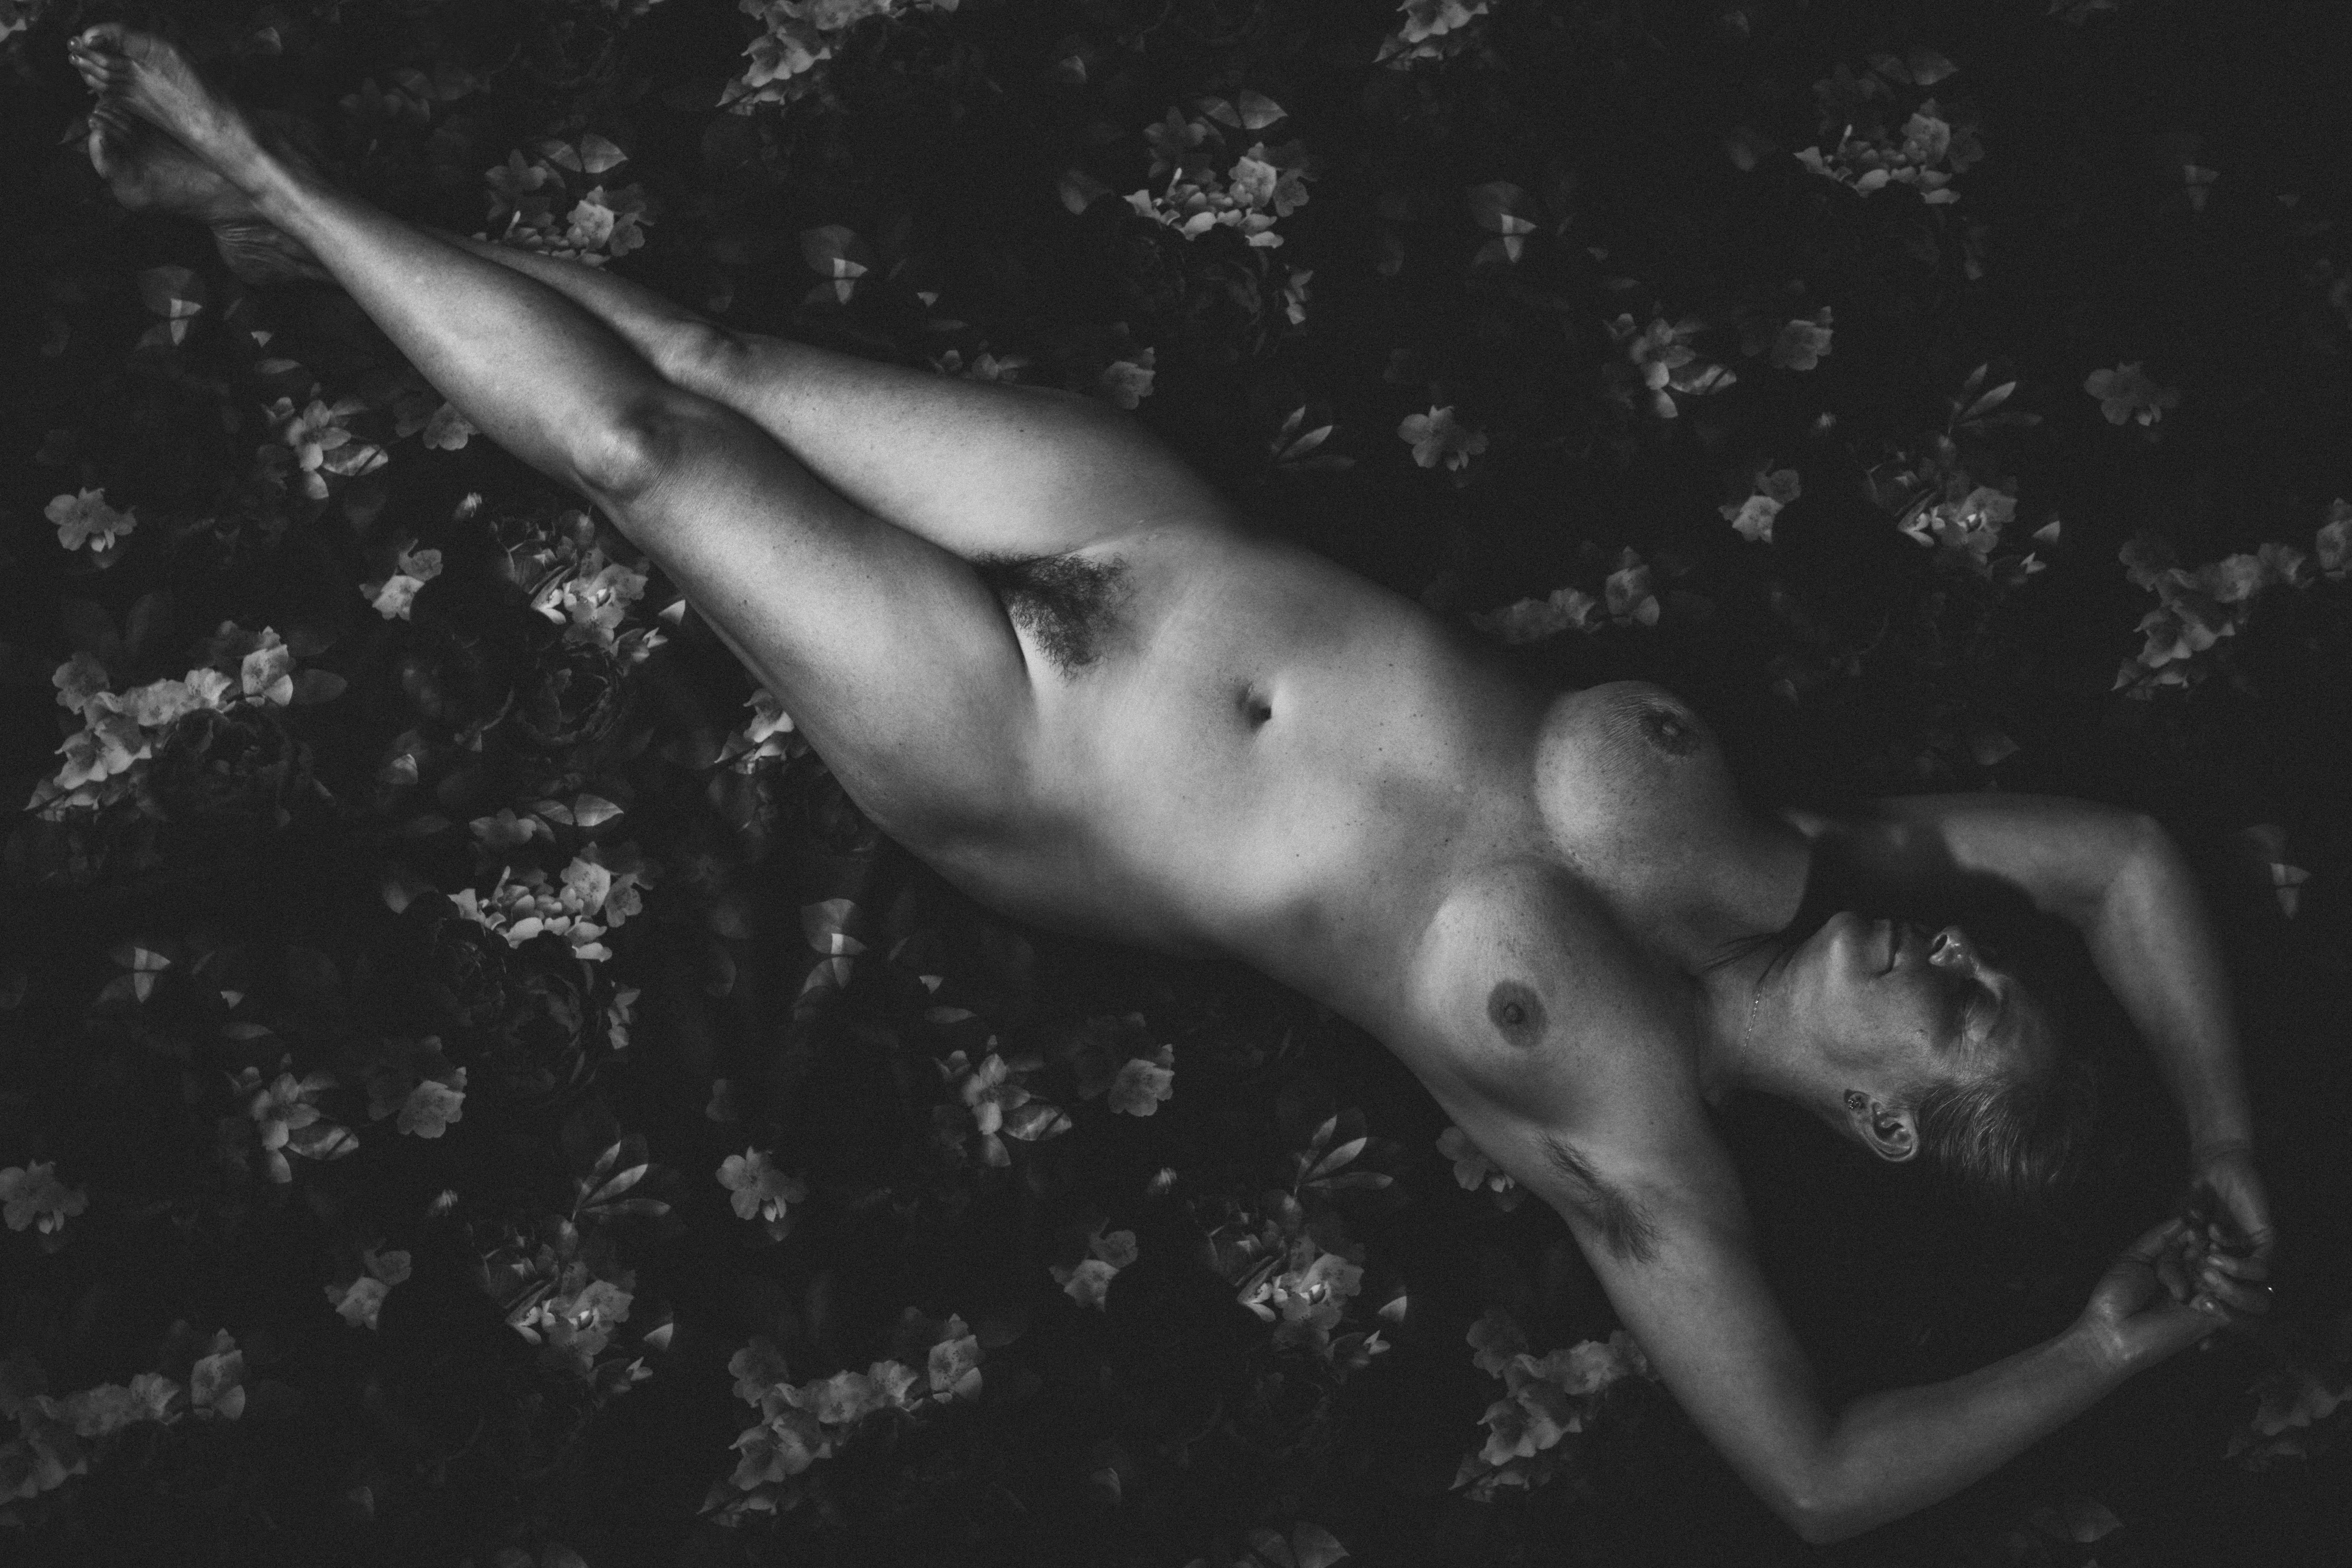 Laurentina Miksys Black and White Photograph - “Portrait of Nude Woman” Fine Art Nude Photography Limited Edition Print 2/3